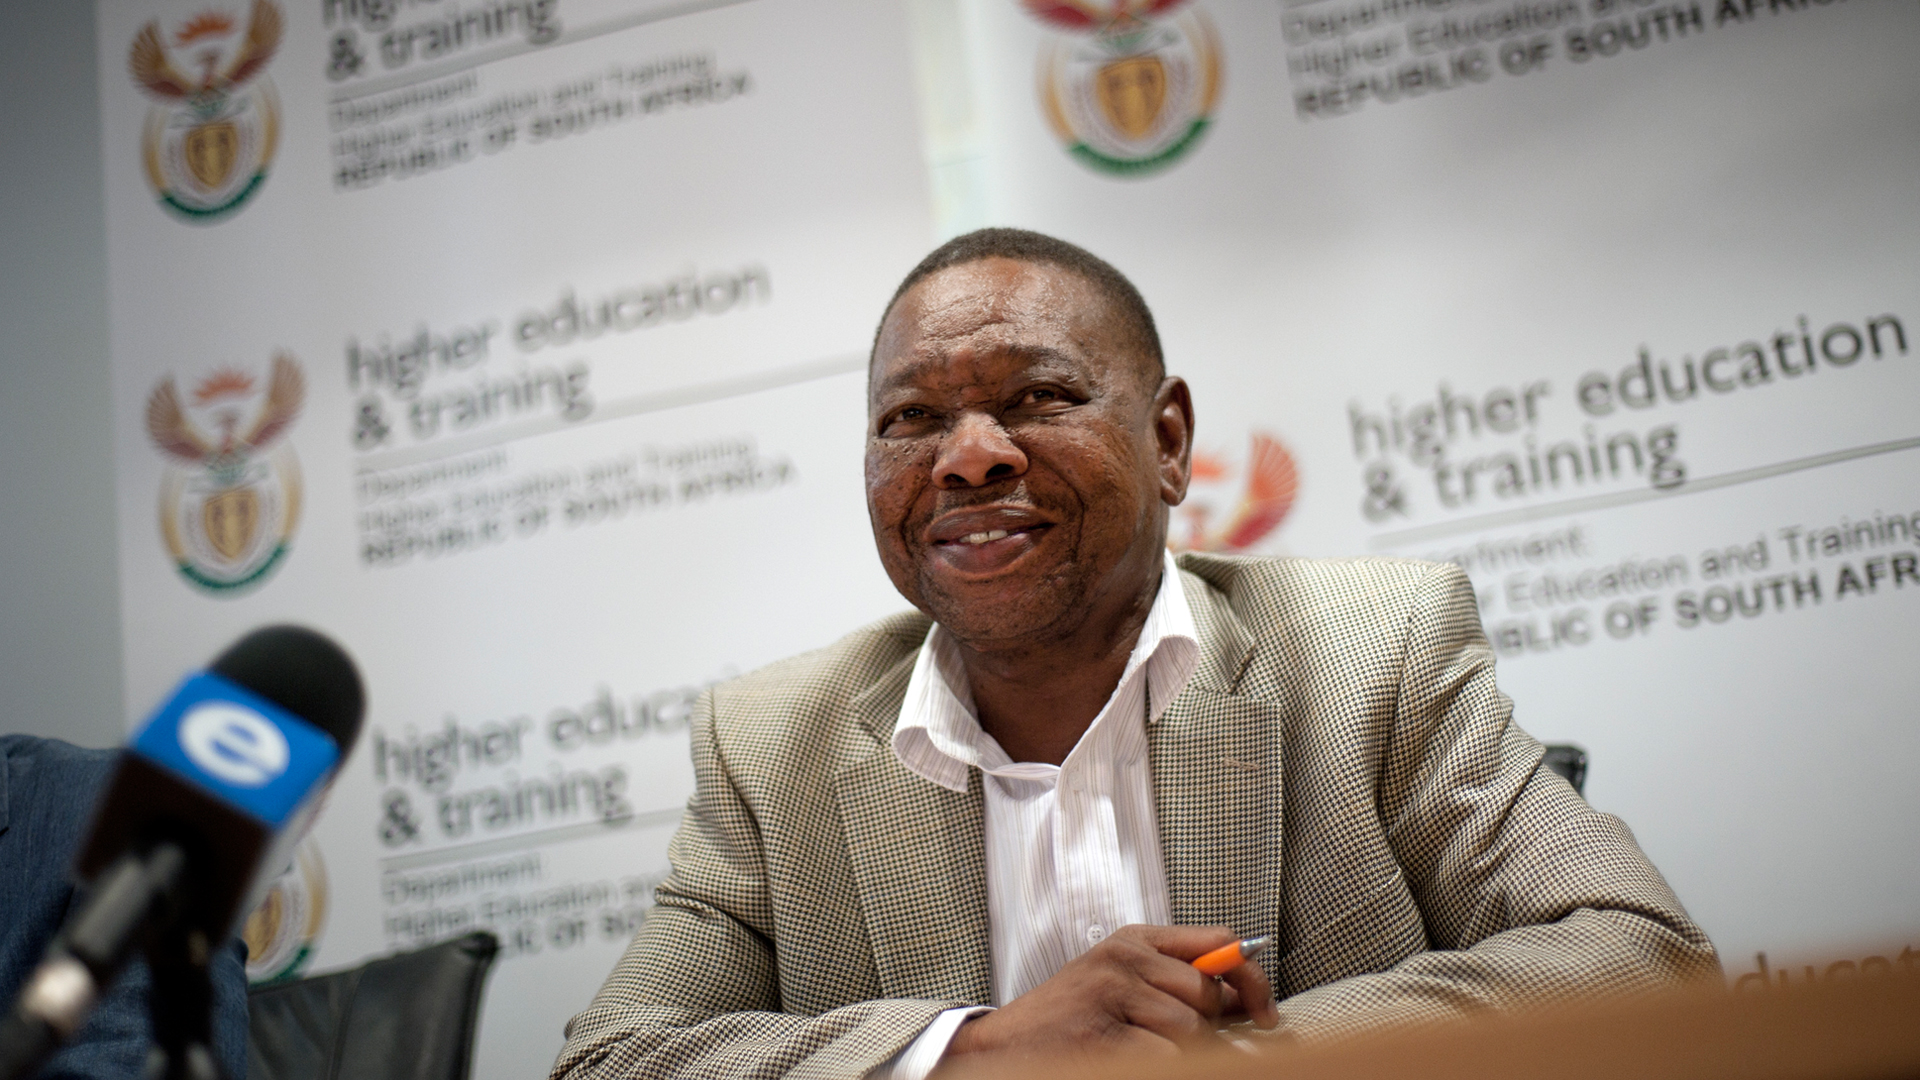 <p>The Minister of Higher Education and Training, Dr “Blade” Nzimande, launches the <em>White Paper for Post-School Education and Training</em>, emphasising the need for greater access to higher education and for the establishment of more universities in South Africa.</p>